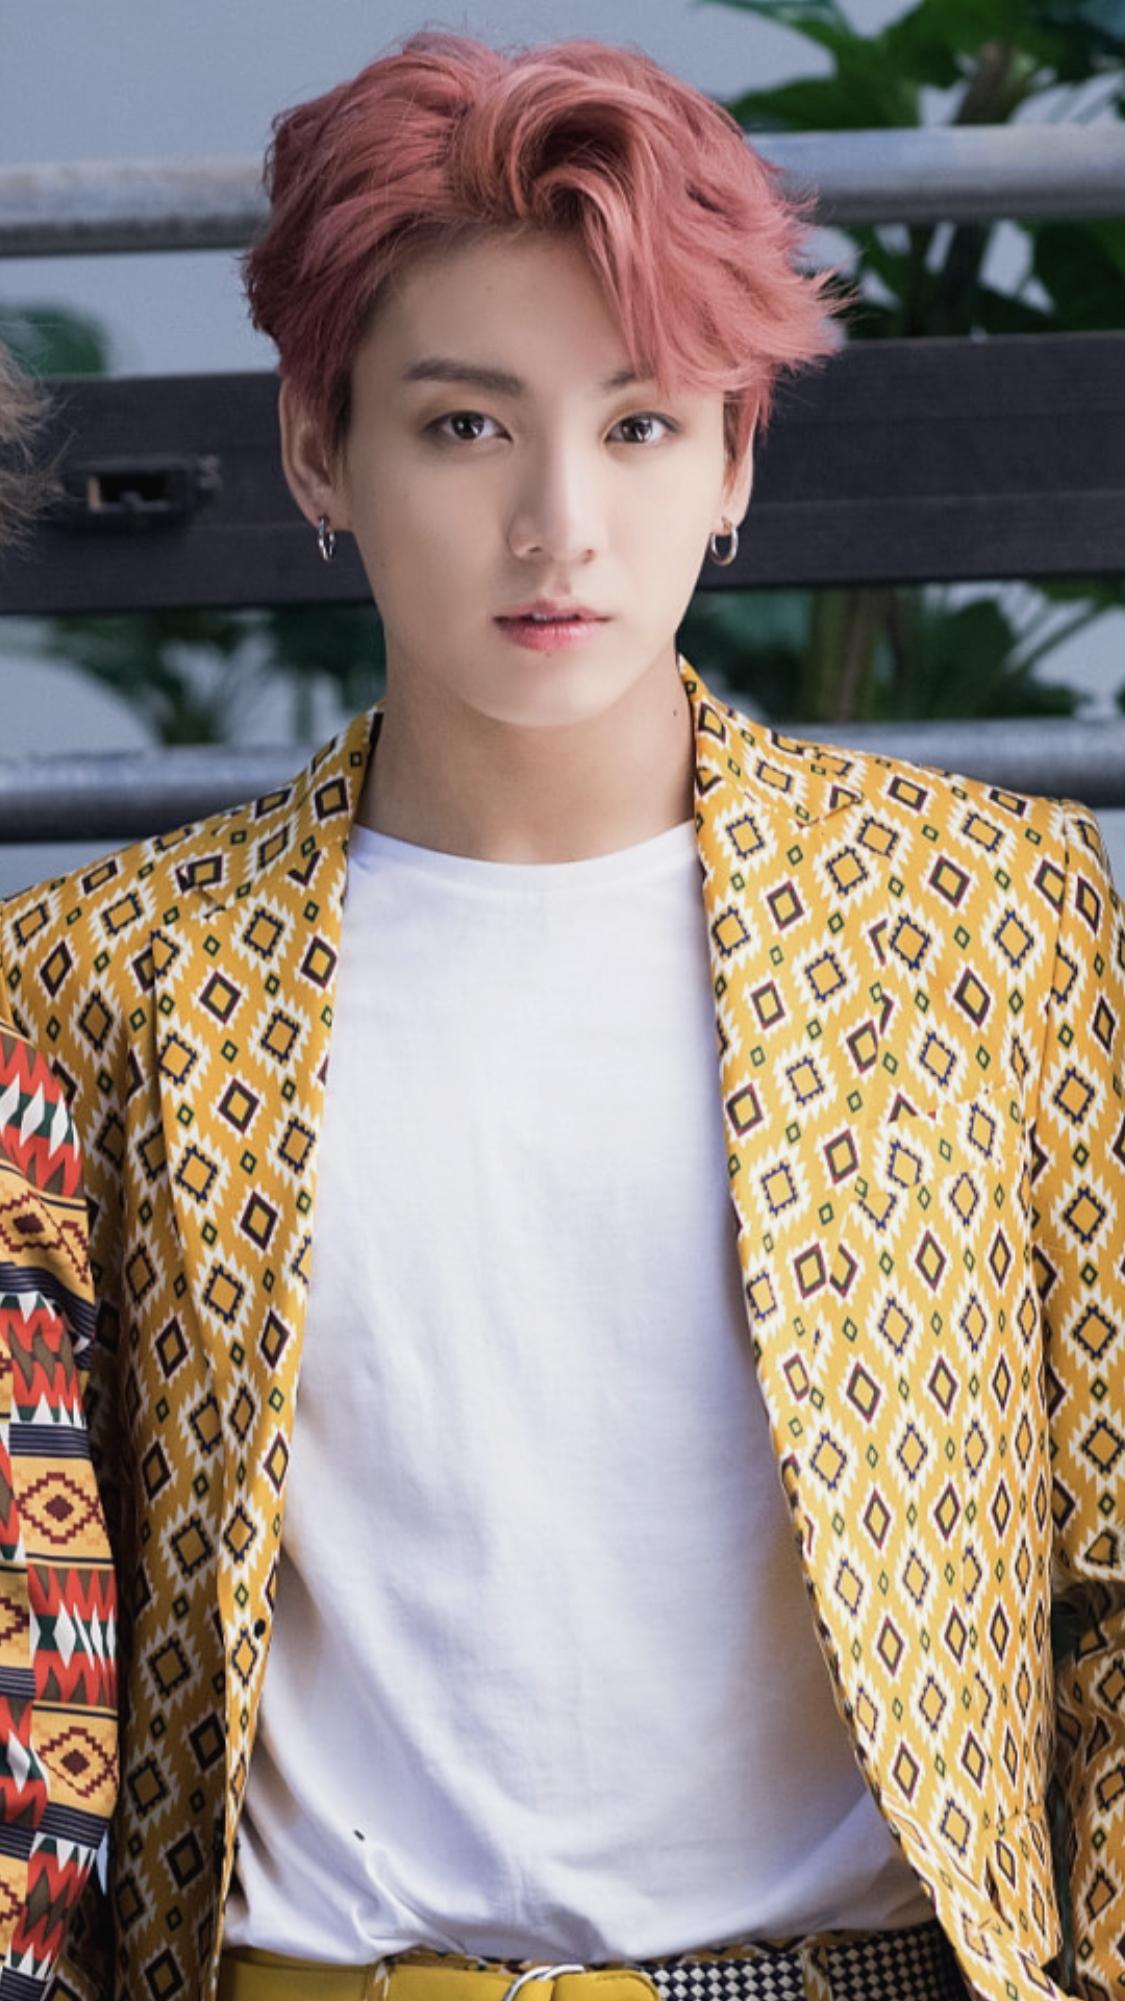 29 Wallpaper Jungkook Bts Cute 2021 Pictures Asian Celebrity Profile